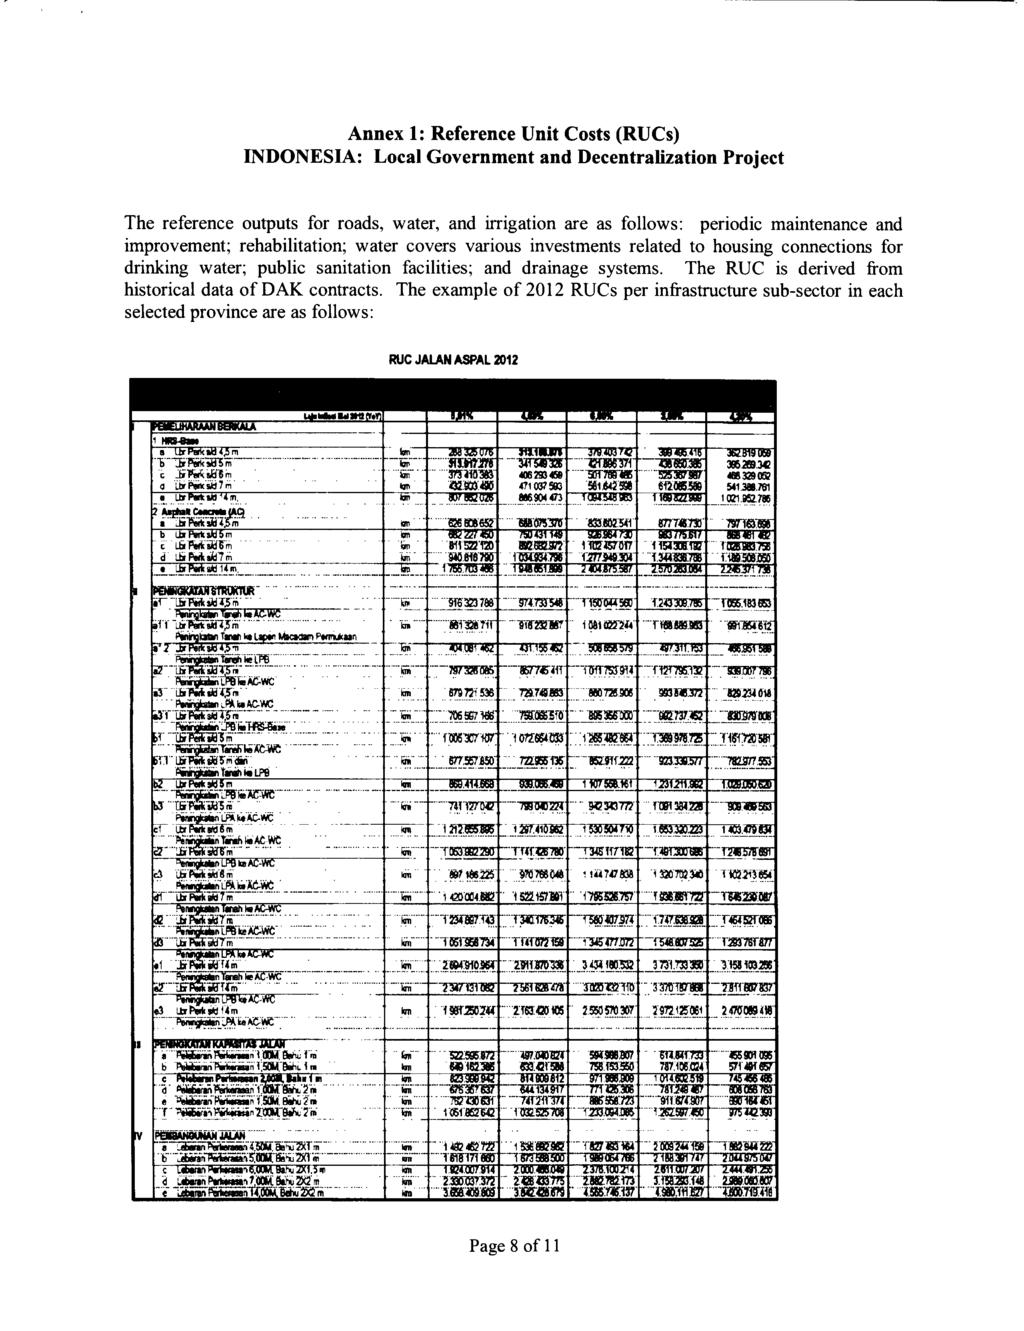 Annex 1: Reference Unit Costs (RUCs) INDONESIA: Local Government and Decentralization Project The reference outputs for roads, water, and irrigation are as follows: periodic maintenance and